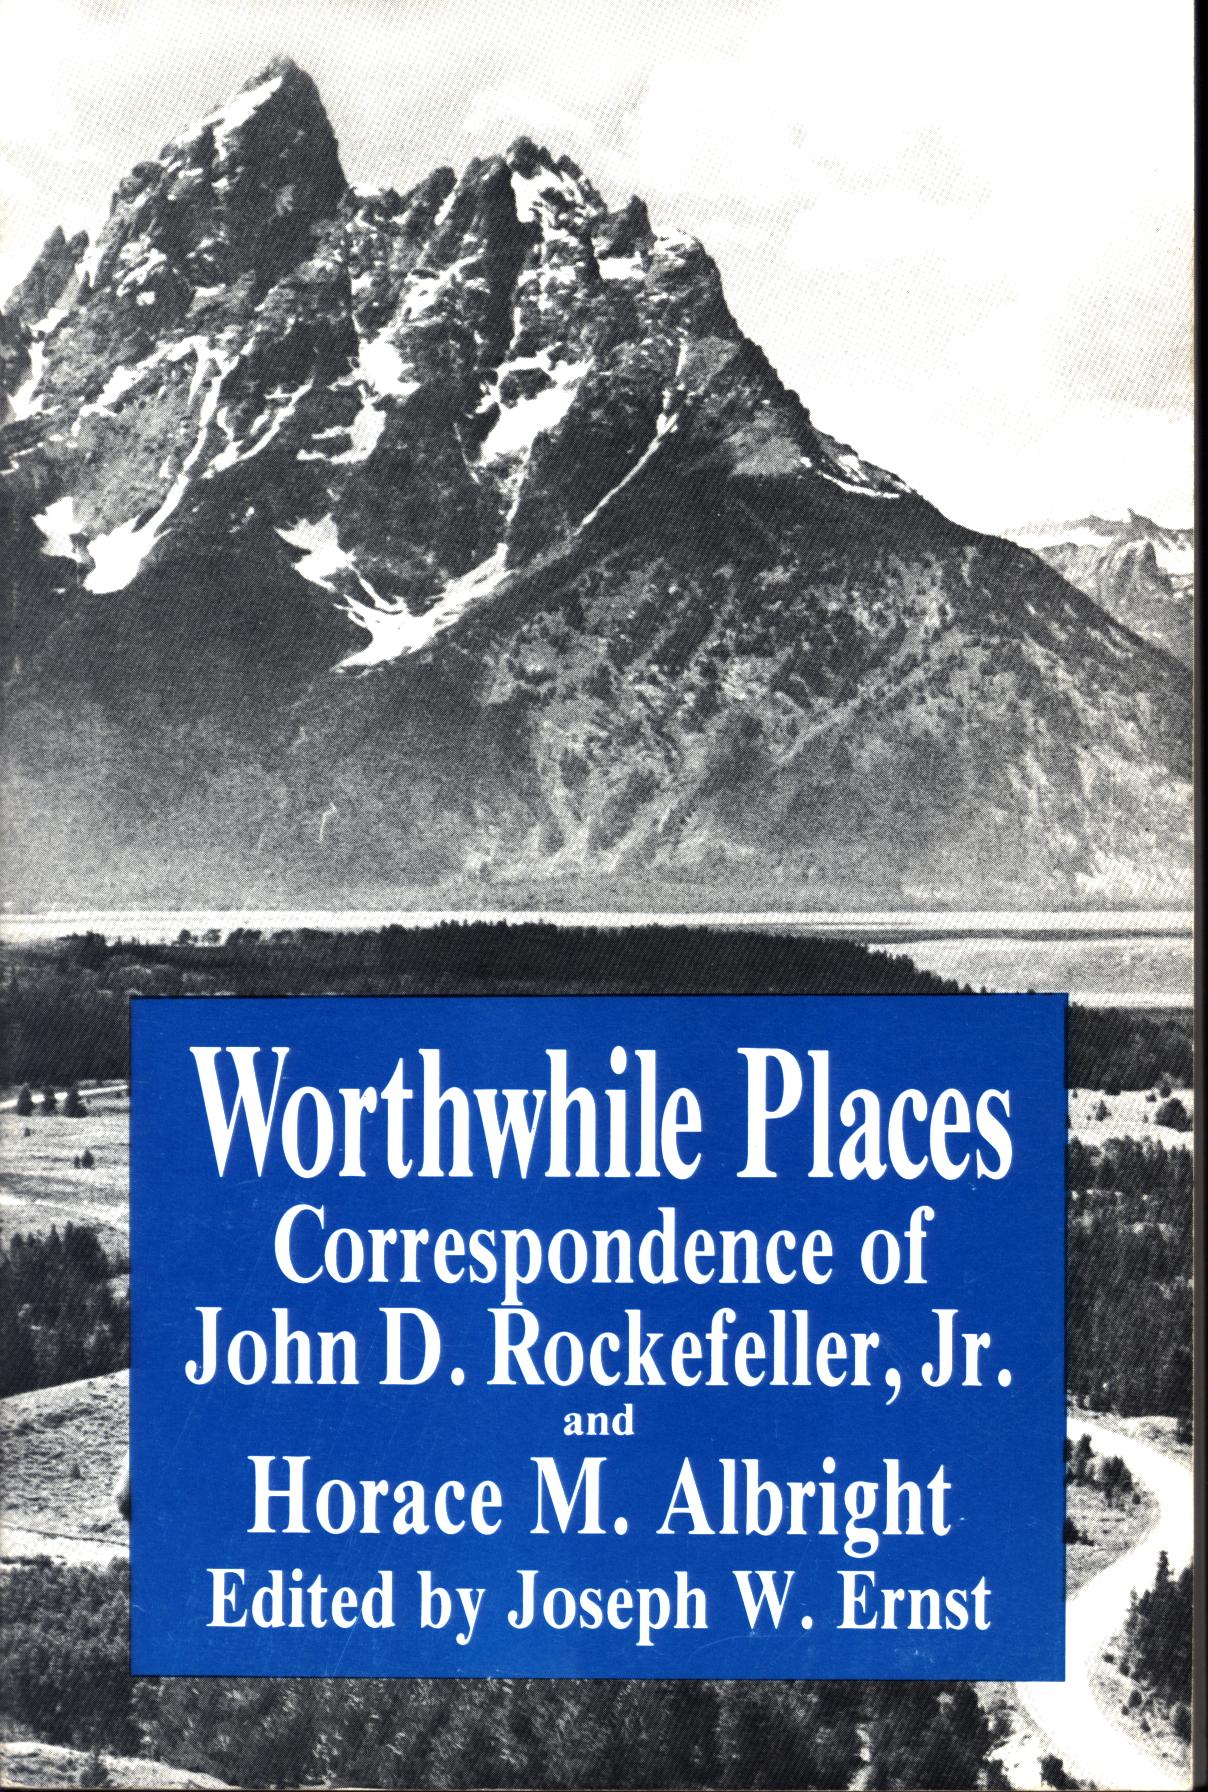 WORTHWHILE PLACES: correspondence of John D. Rockefeller, Jr. and Horace M. Albright. 